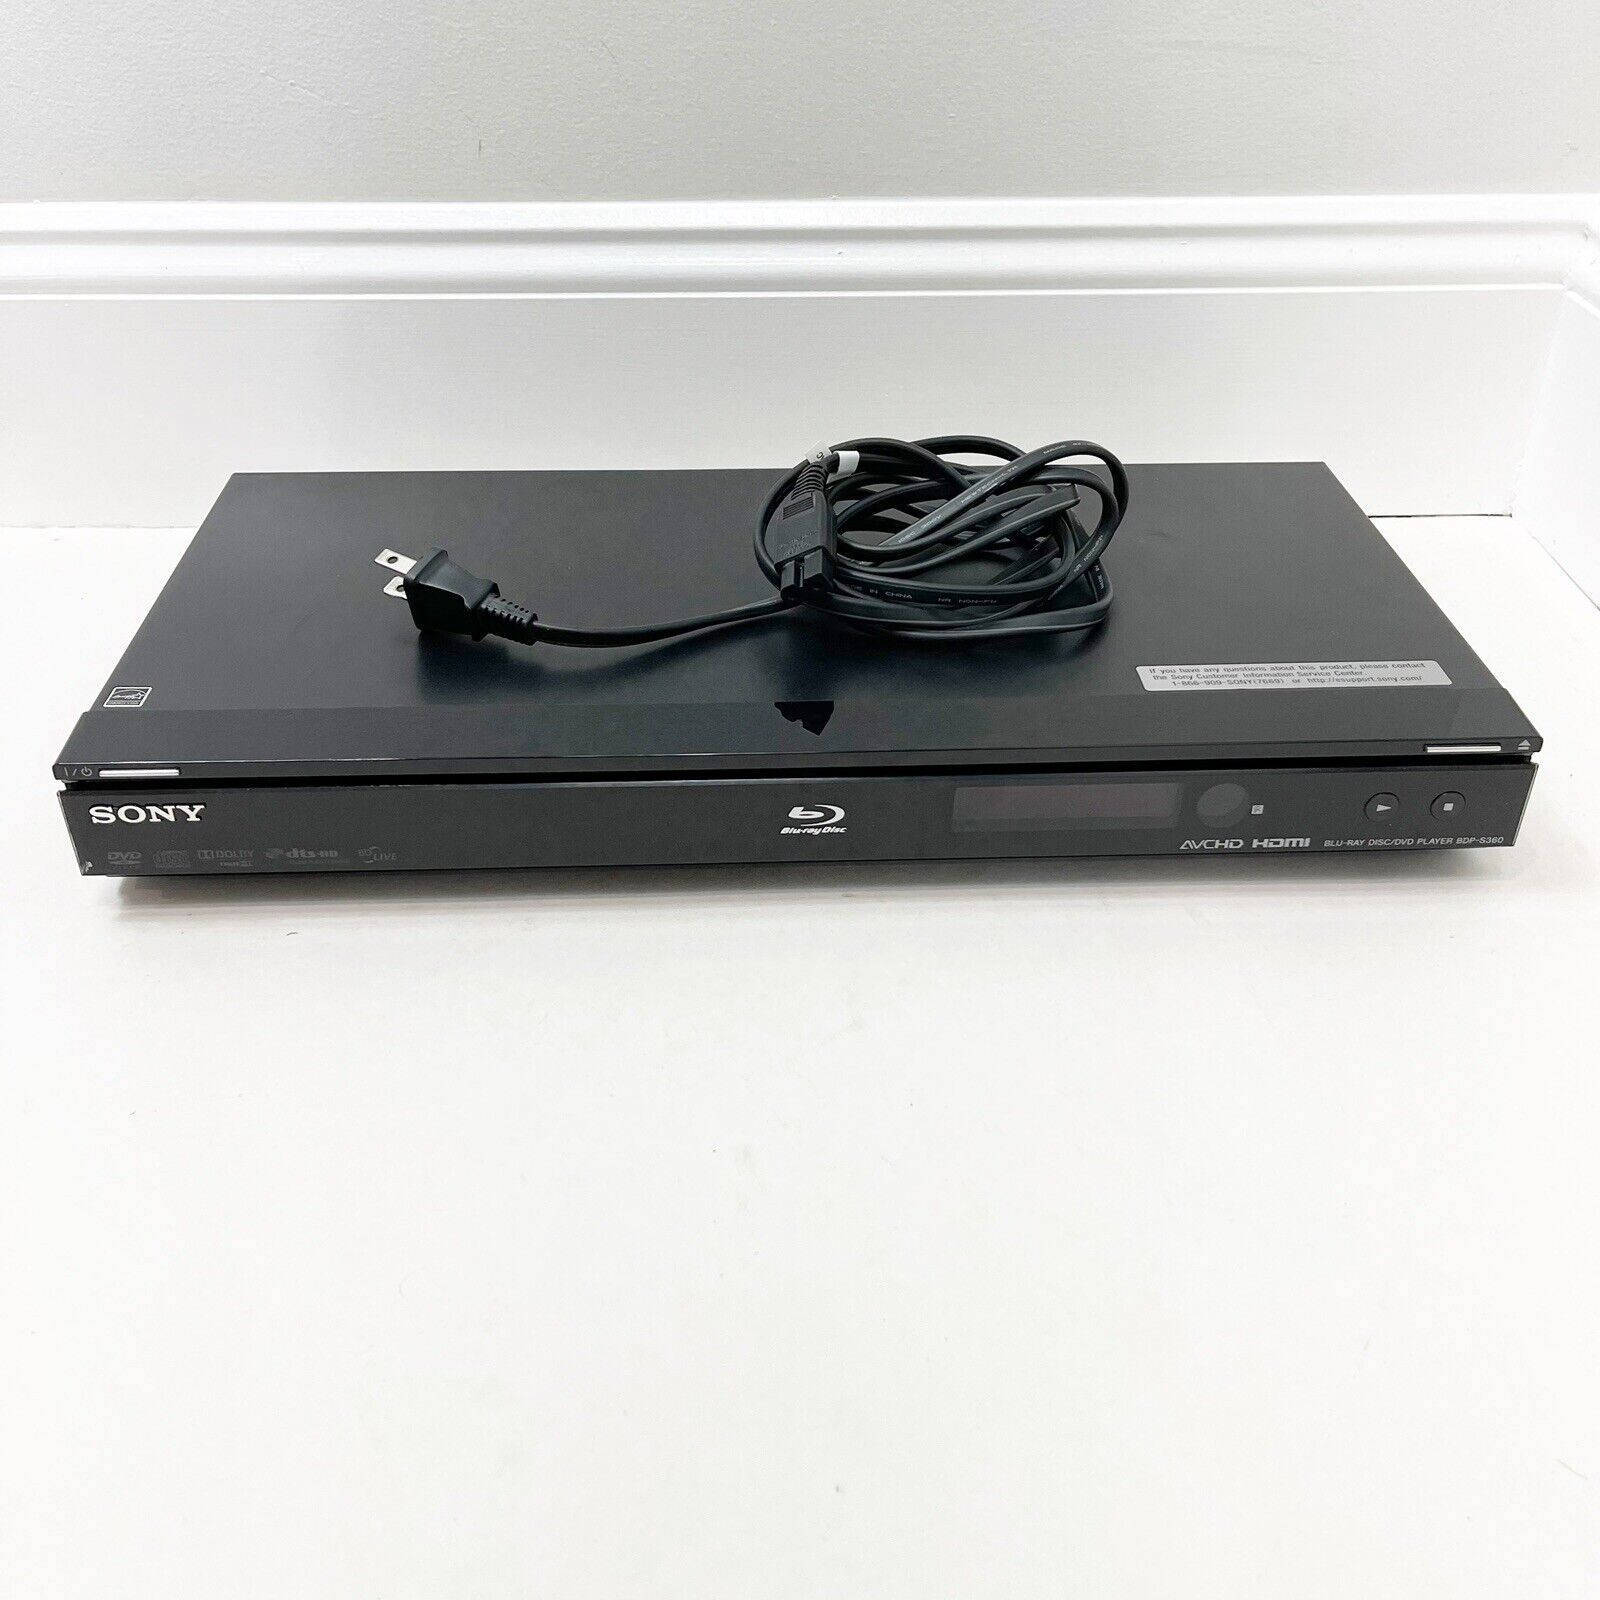 Sony BDP-S360 Blu-Ray Player for sale online | eBay